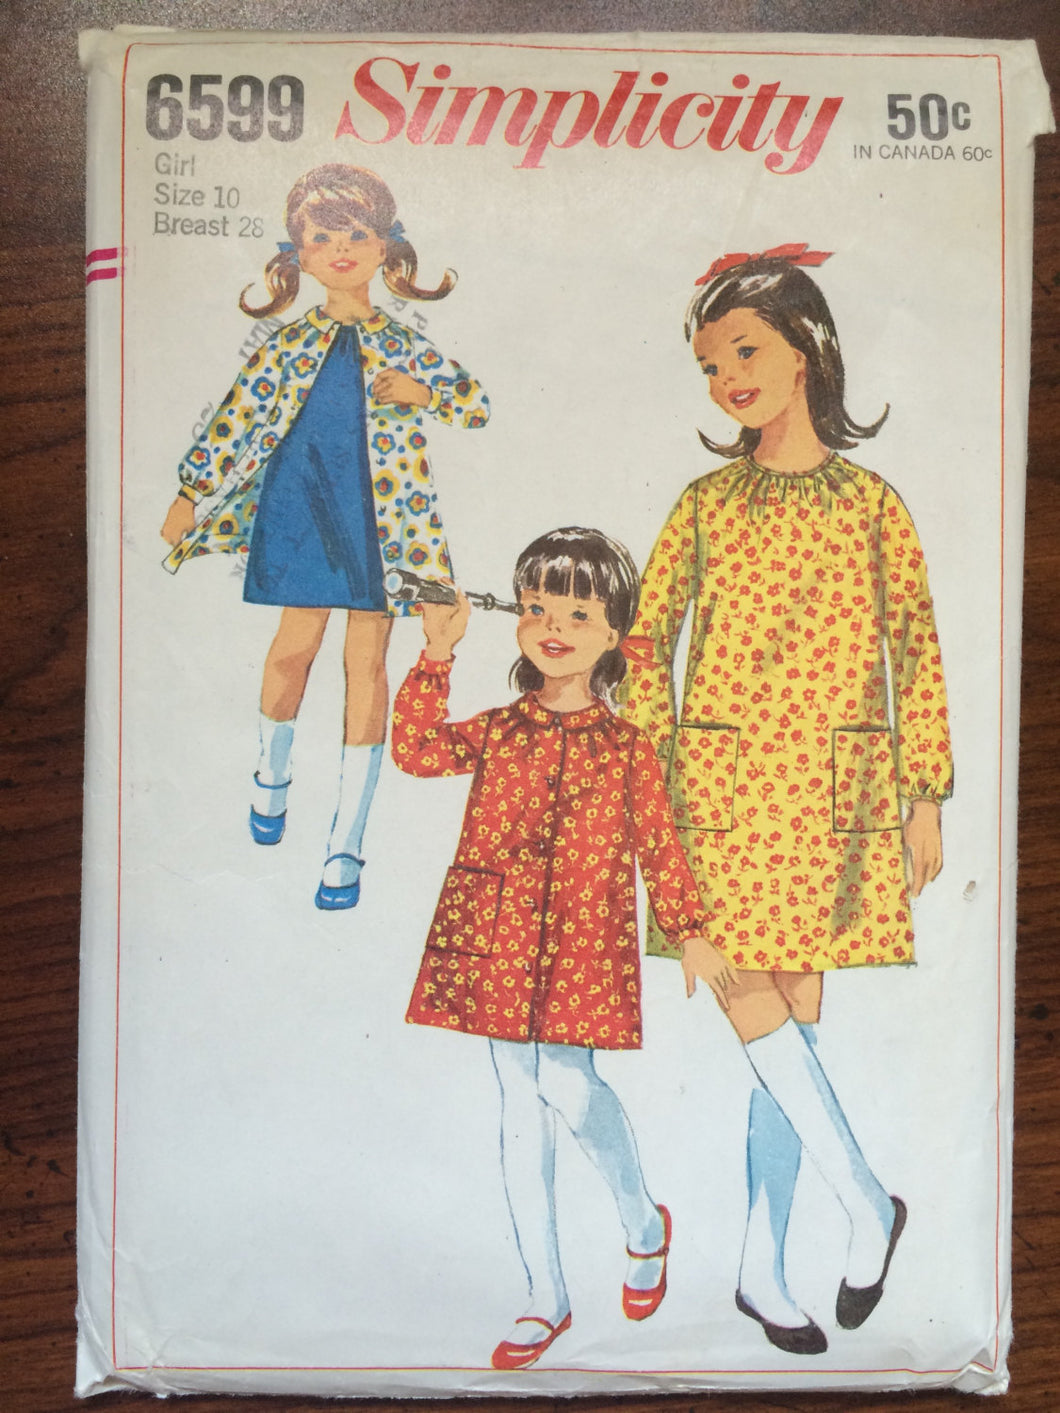 1960s Simplicity Girl's Dress and Smock Pattern #6599 Size 10, Breast 28